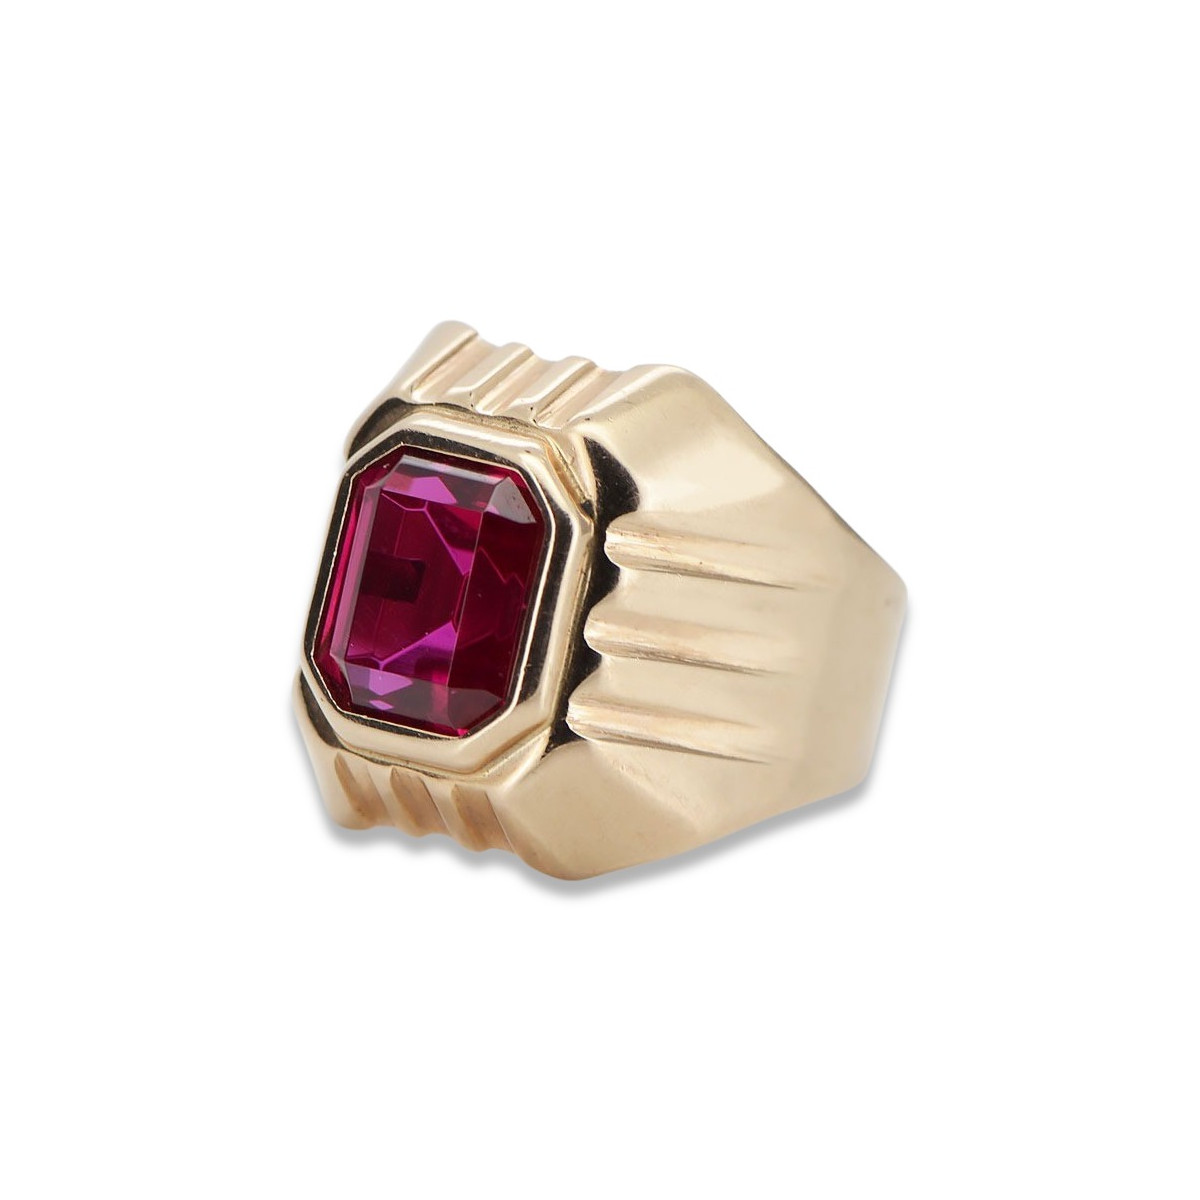 Men's Diamond Jewelry with Red Ruby Stone in Gold-Plated Solid Silver – J F  M